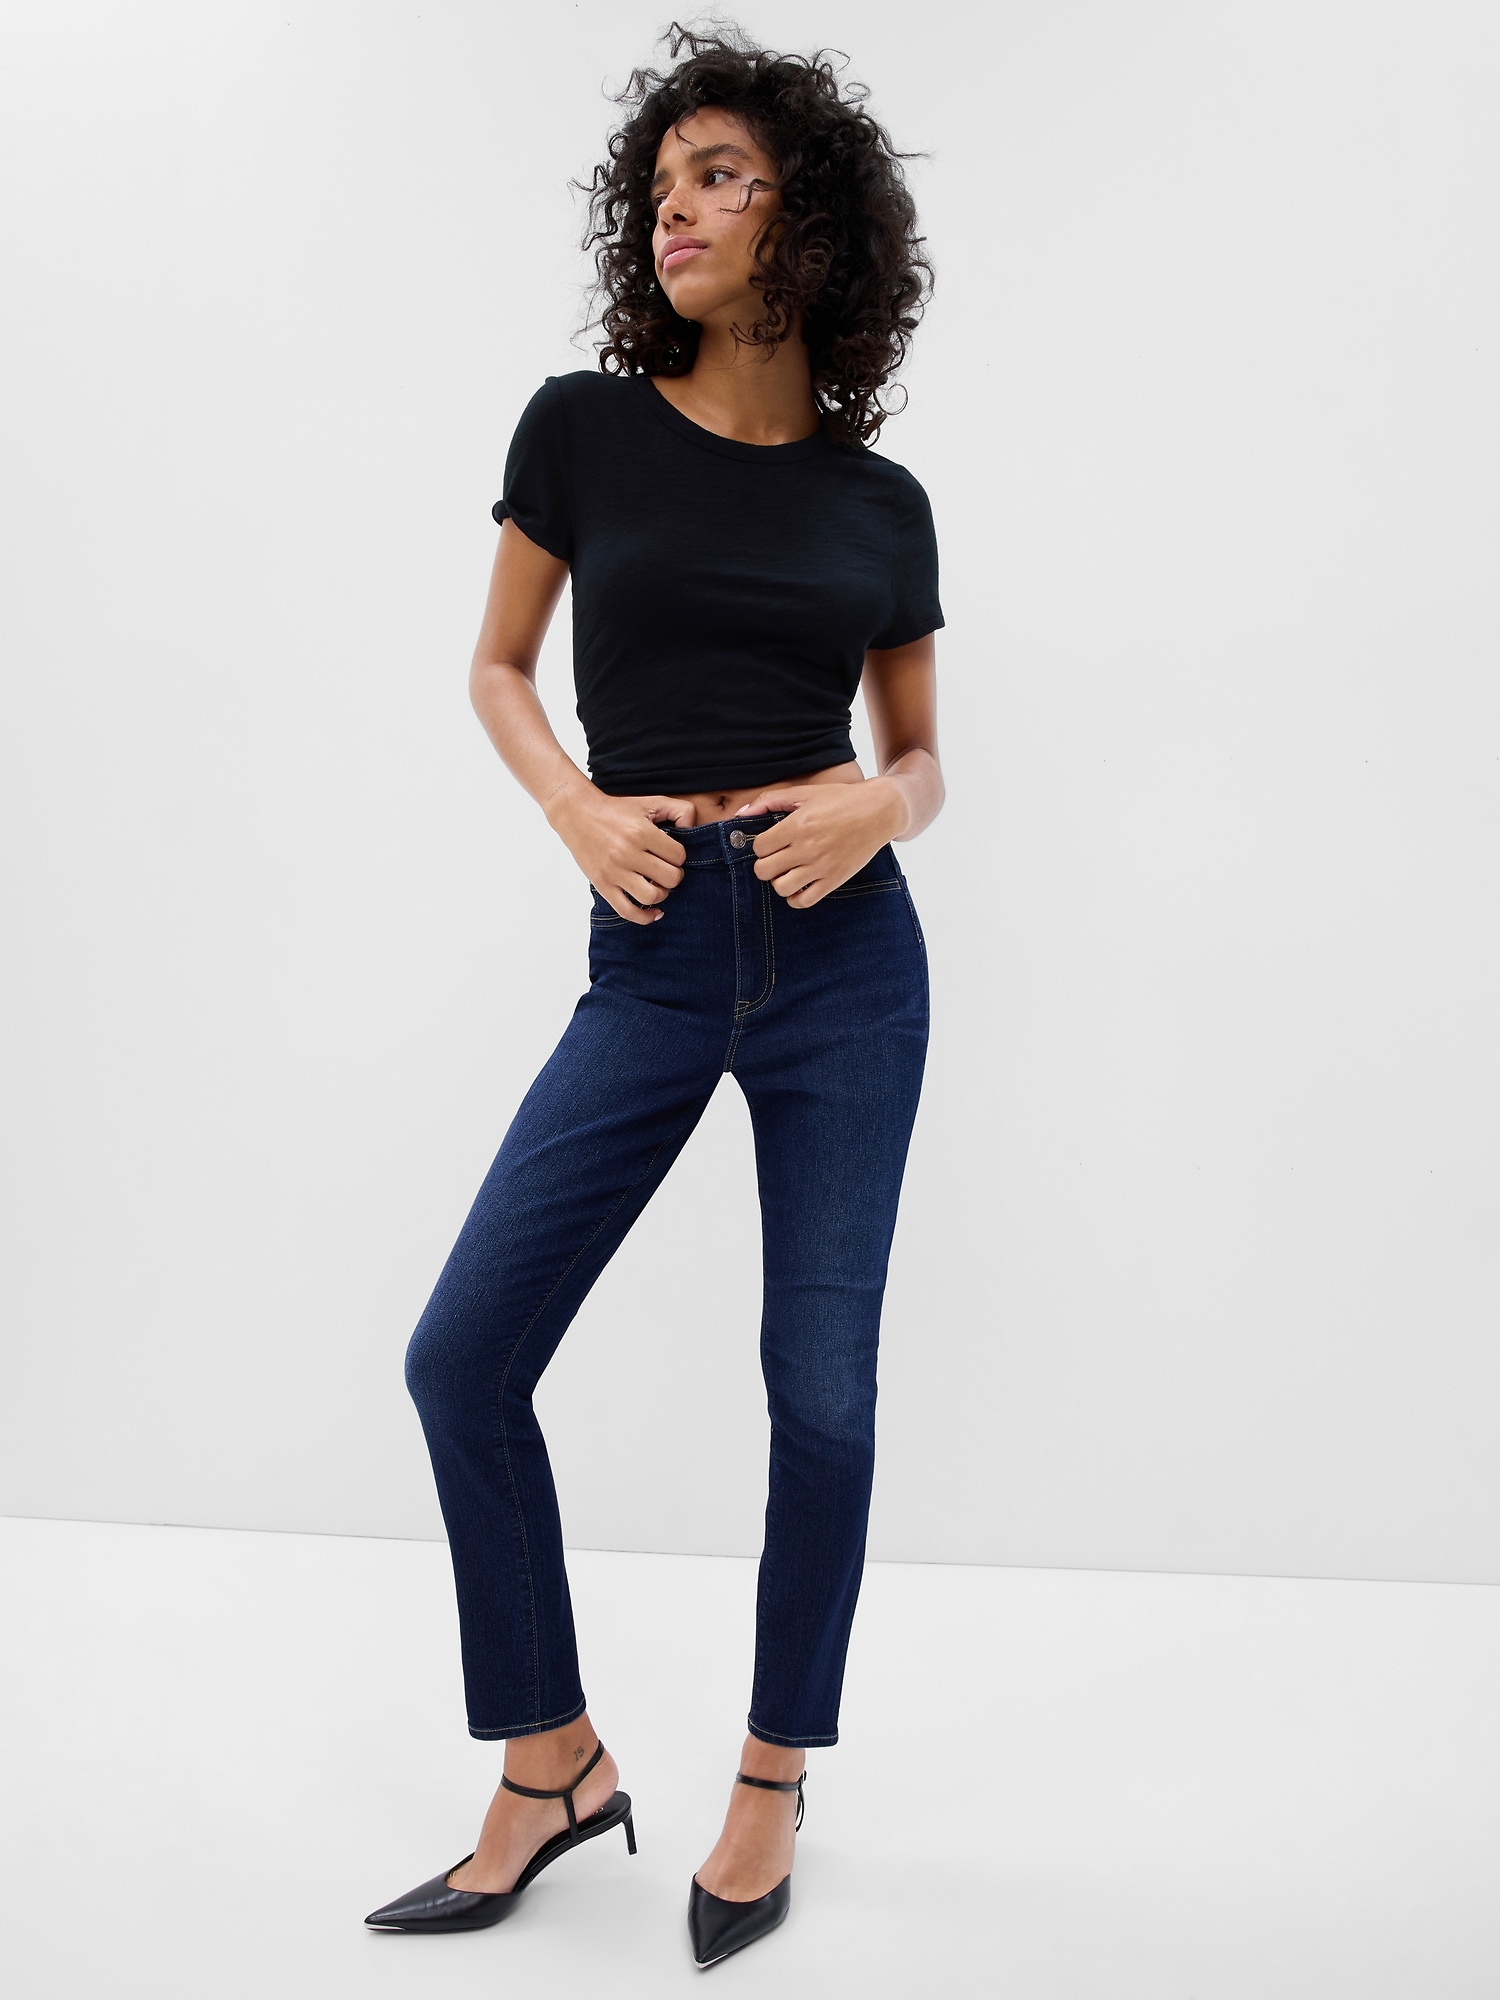 Buy Gap High Rise Jeggings with Washwell from the Gap online shop